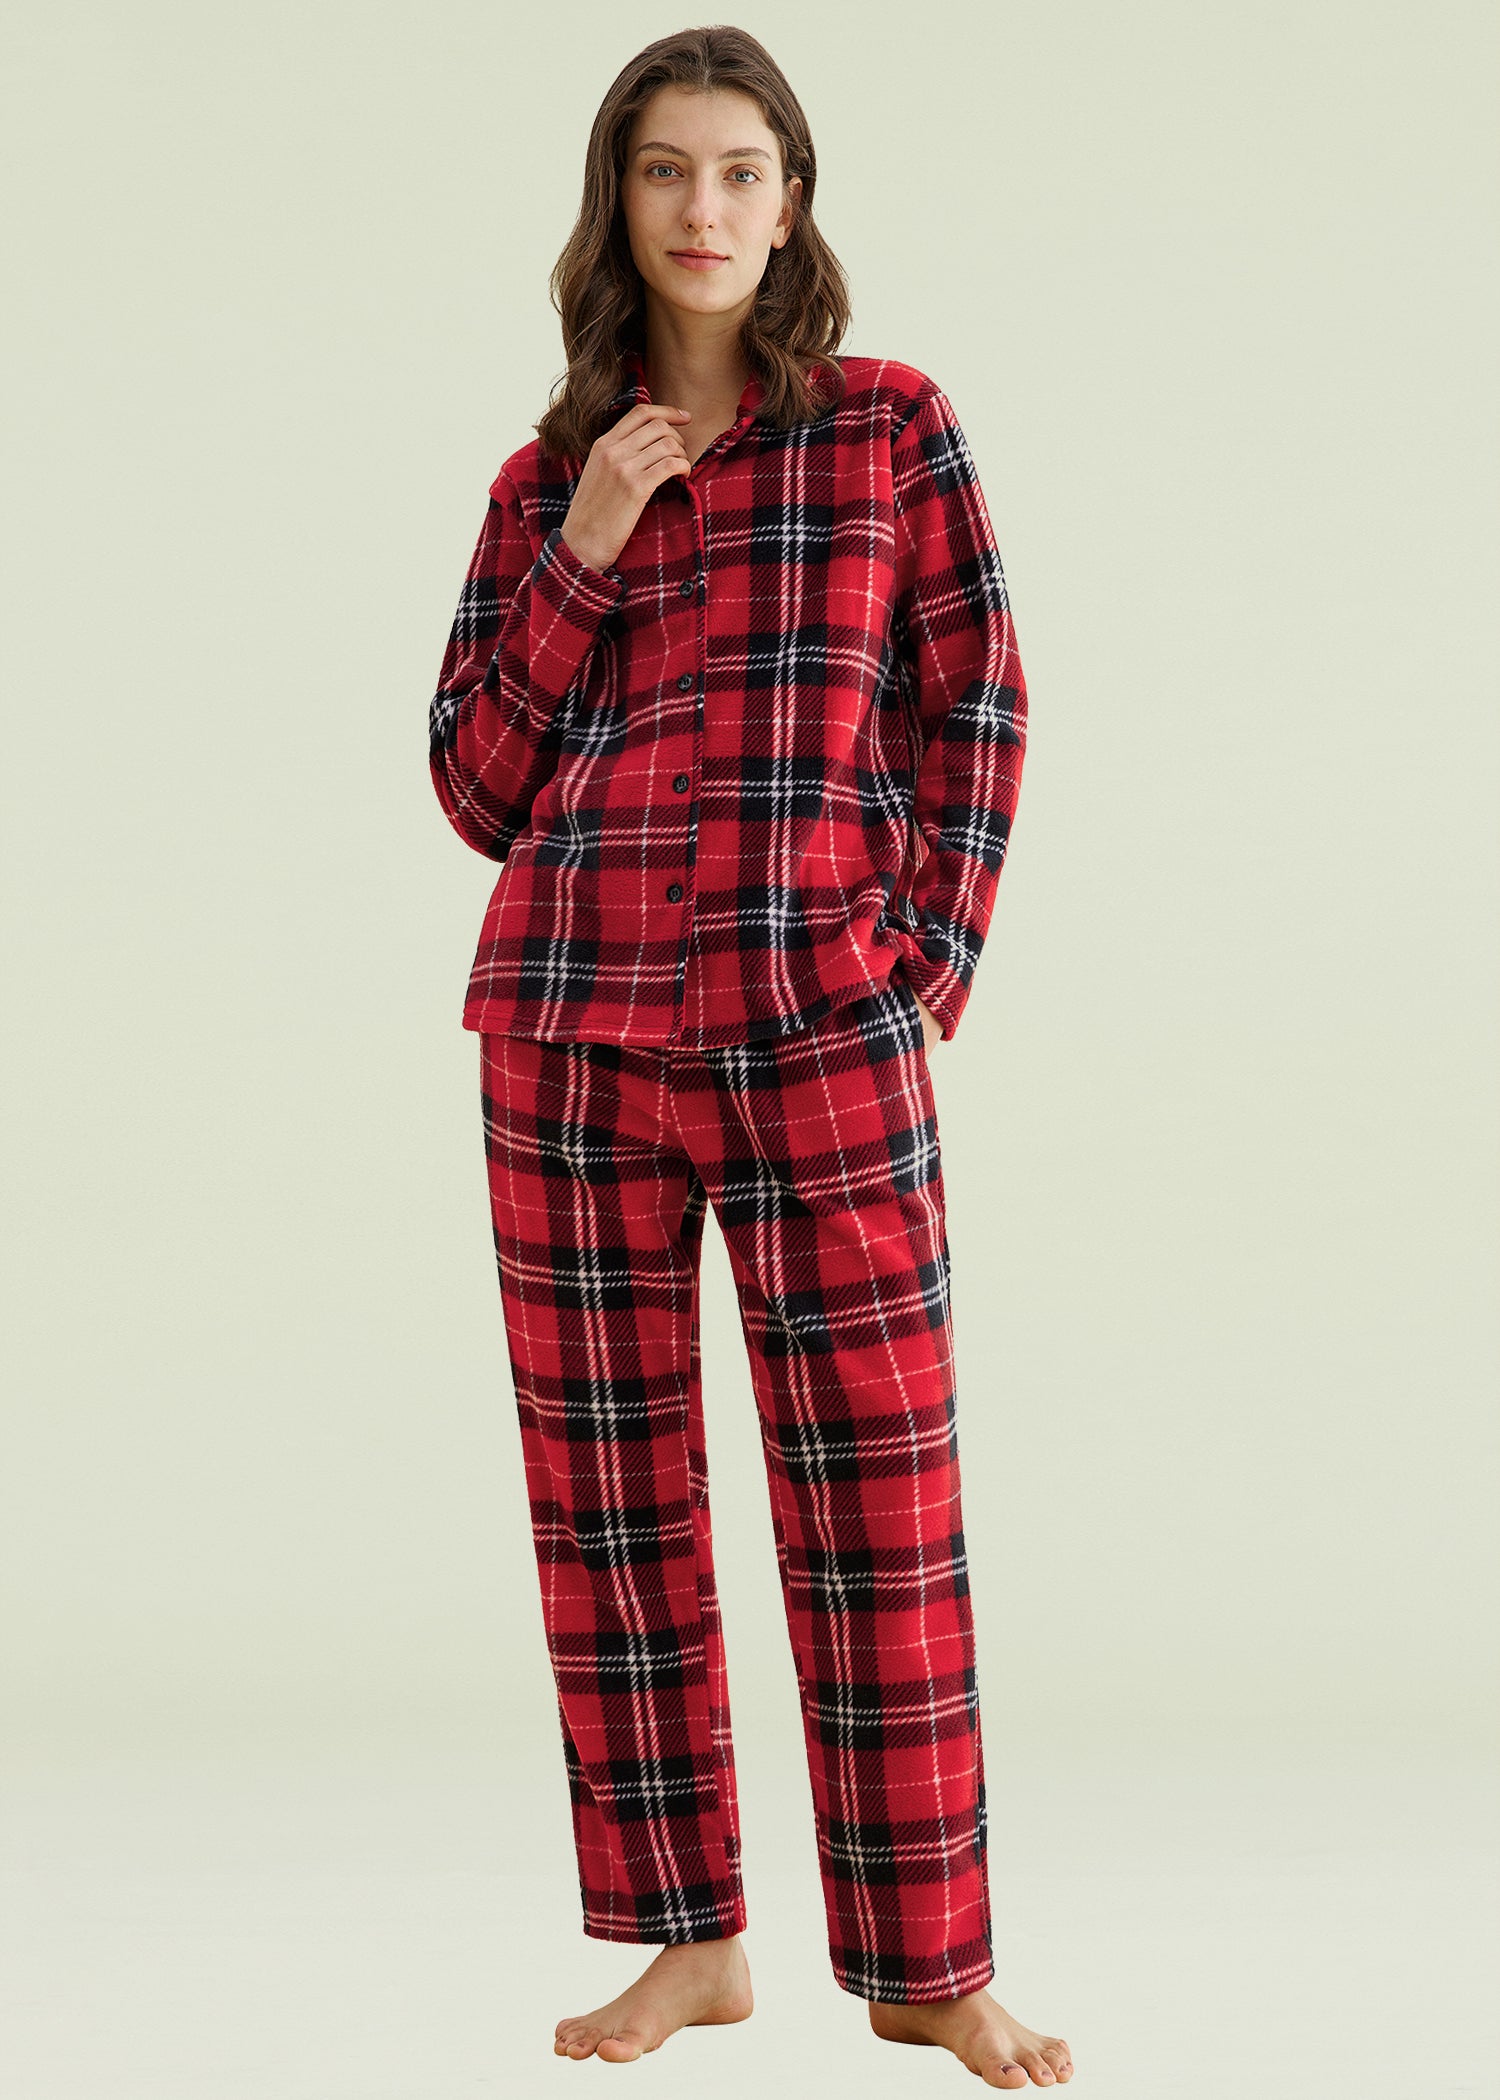 Women's 2 Piece Fleece Pajamas Set Button Down Rollneck Top with Pullover  Pants Sleepwear Full-Length Nightwear Flannel Fuzzy, J17-a, Small :  : Clothing, Shoes & Accessories